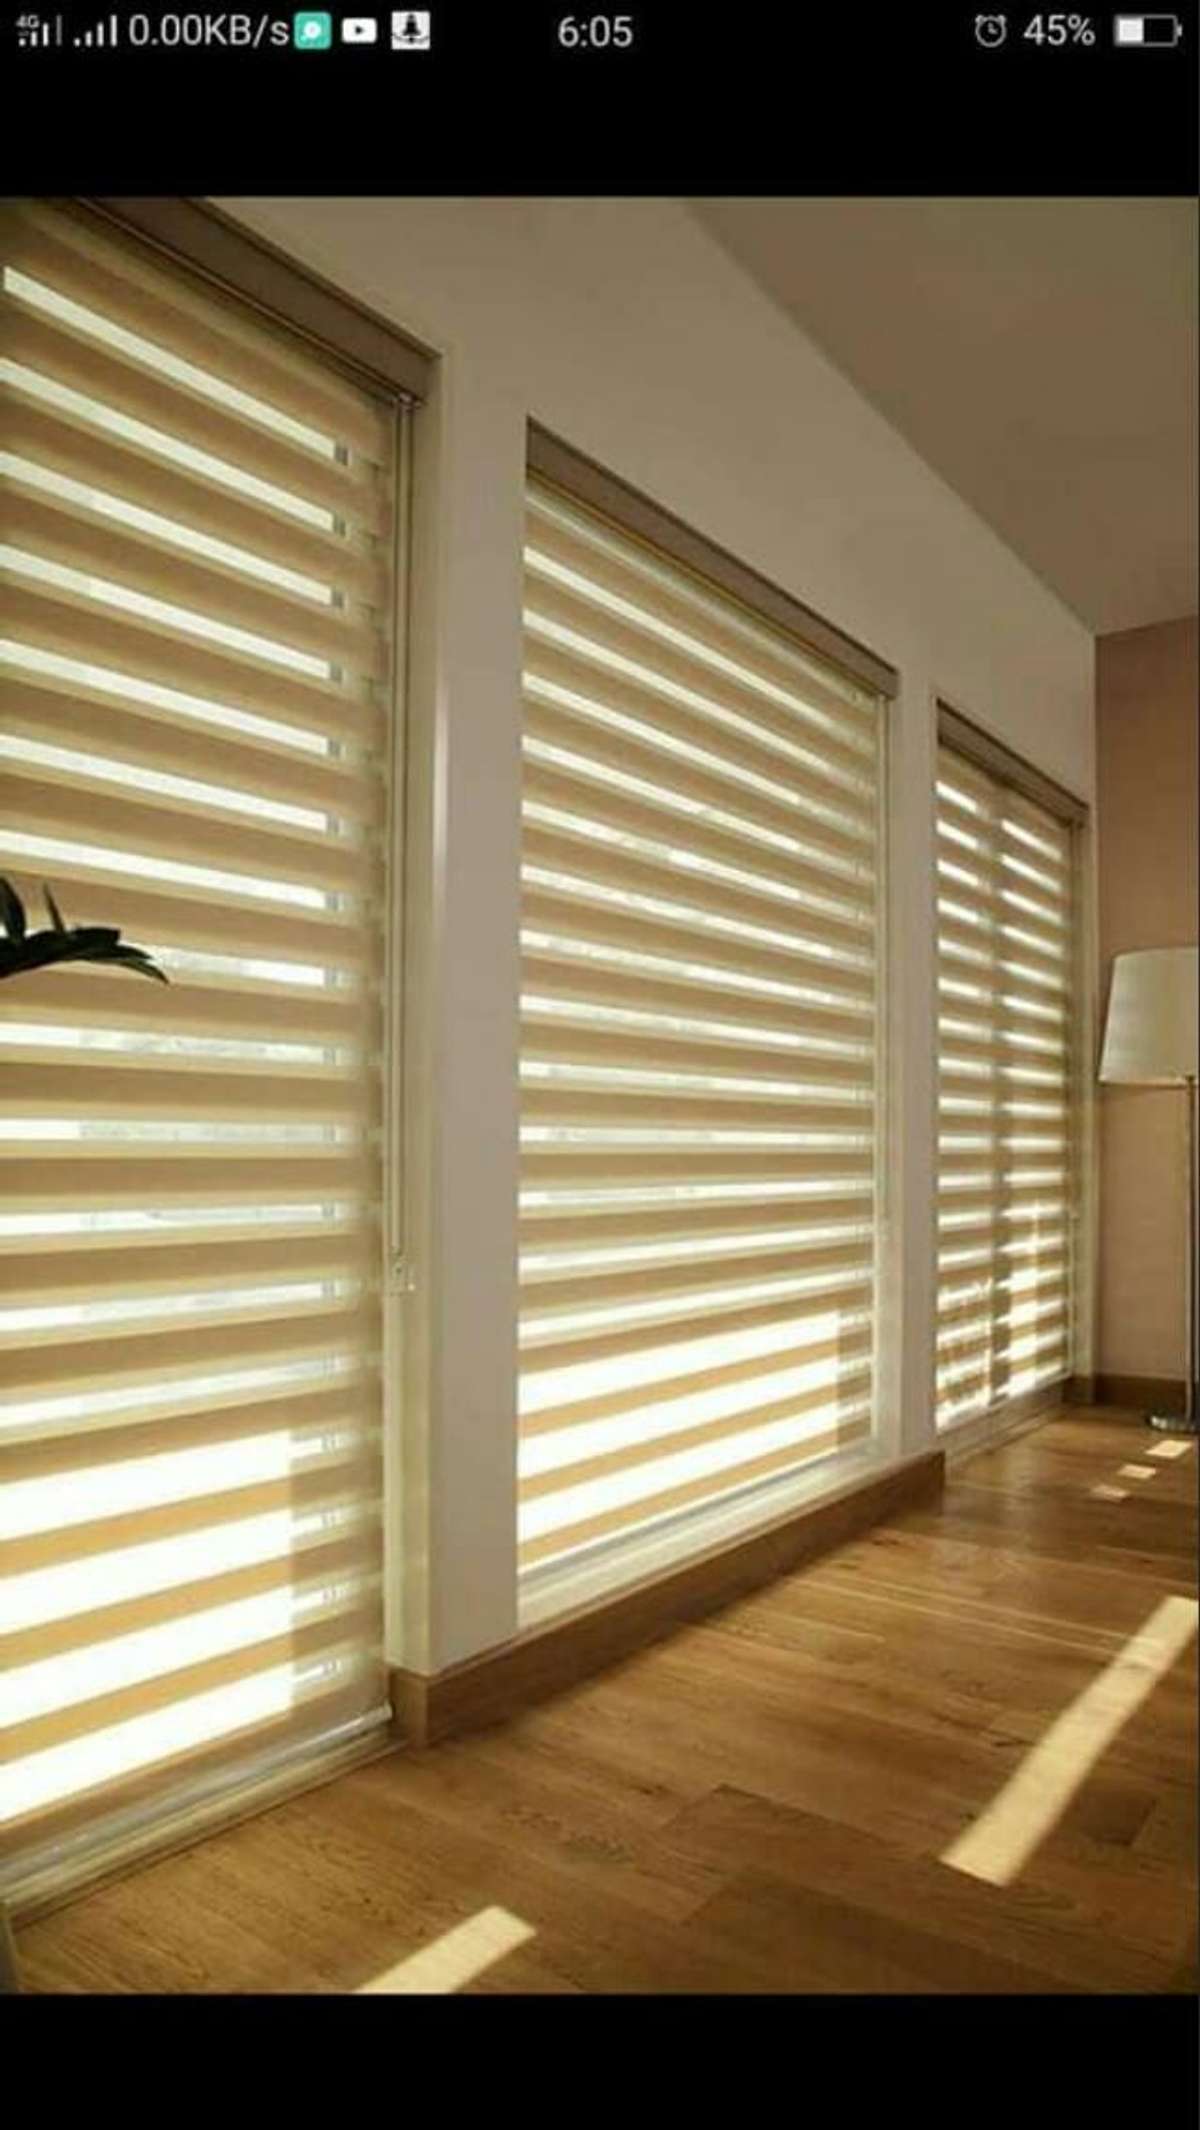 window blinds available call : 7025533766